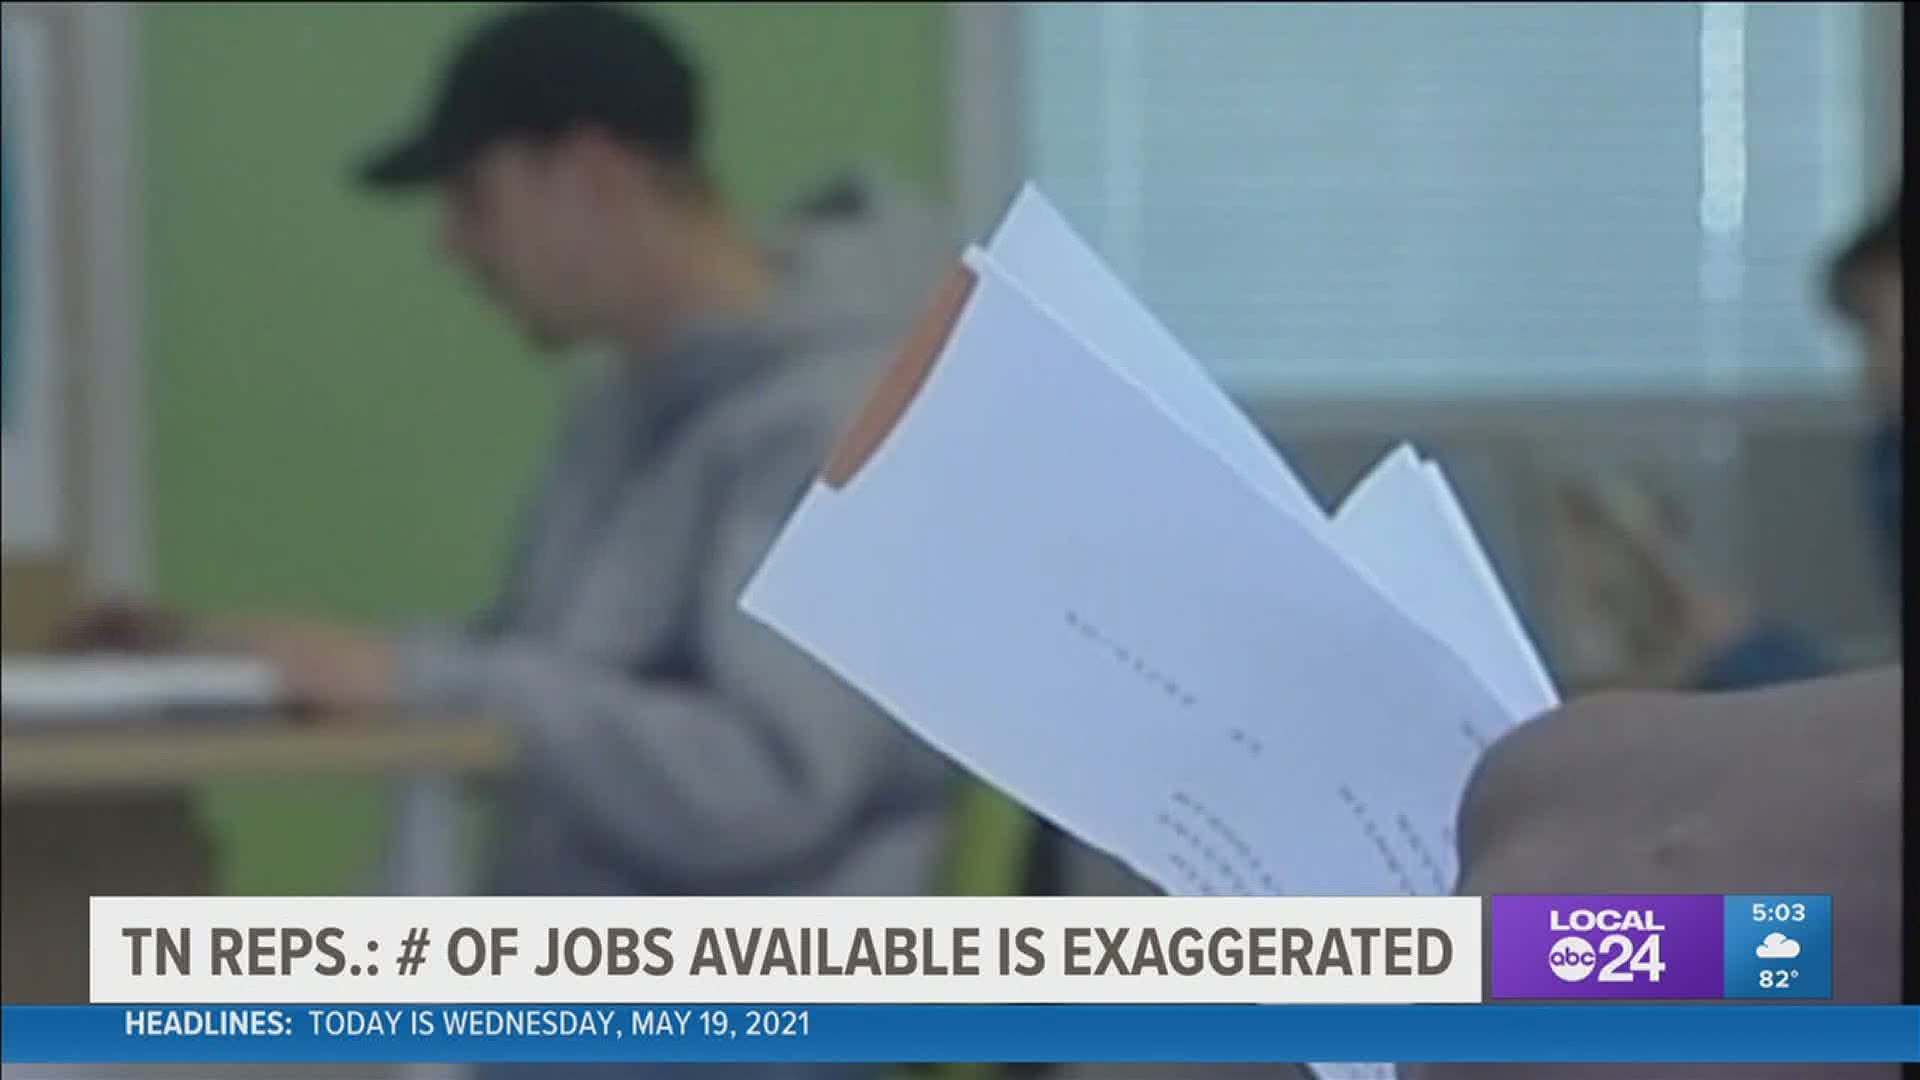 They said the number was not accurate when looking at jobs in metro cities versus rural areas.